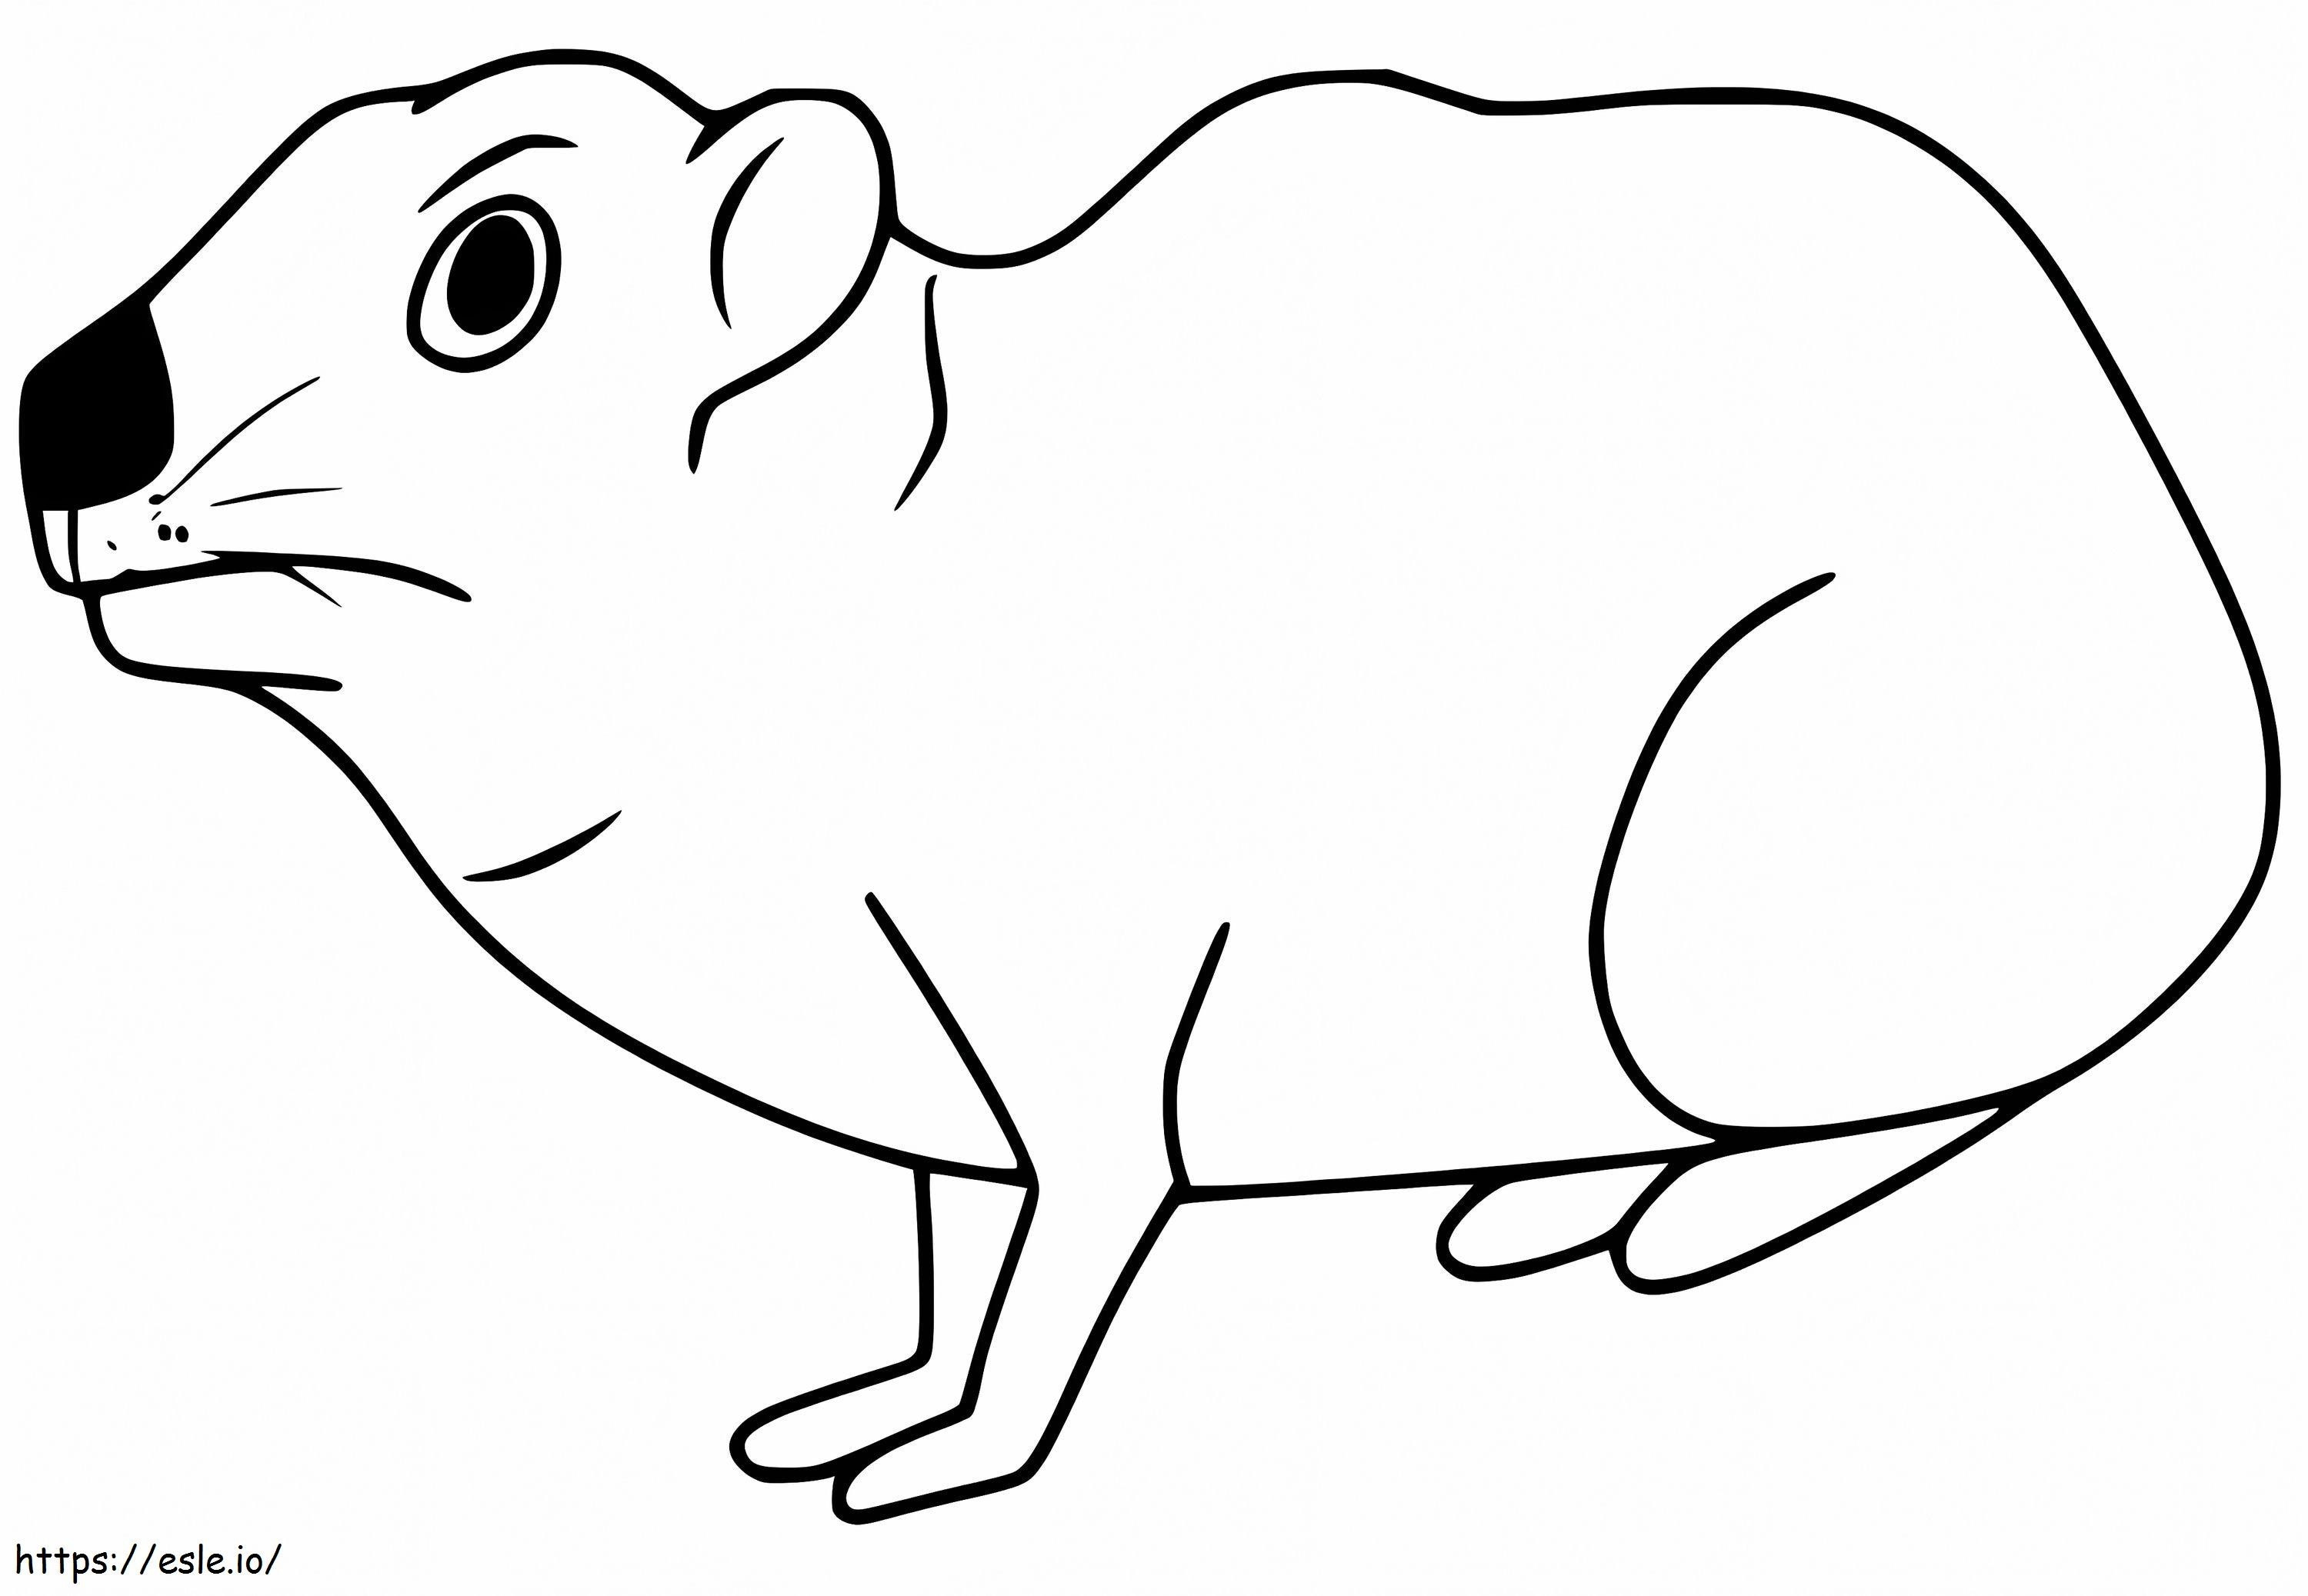 Funny Hyrax coloring page